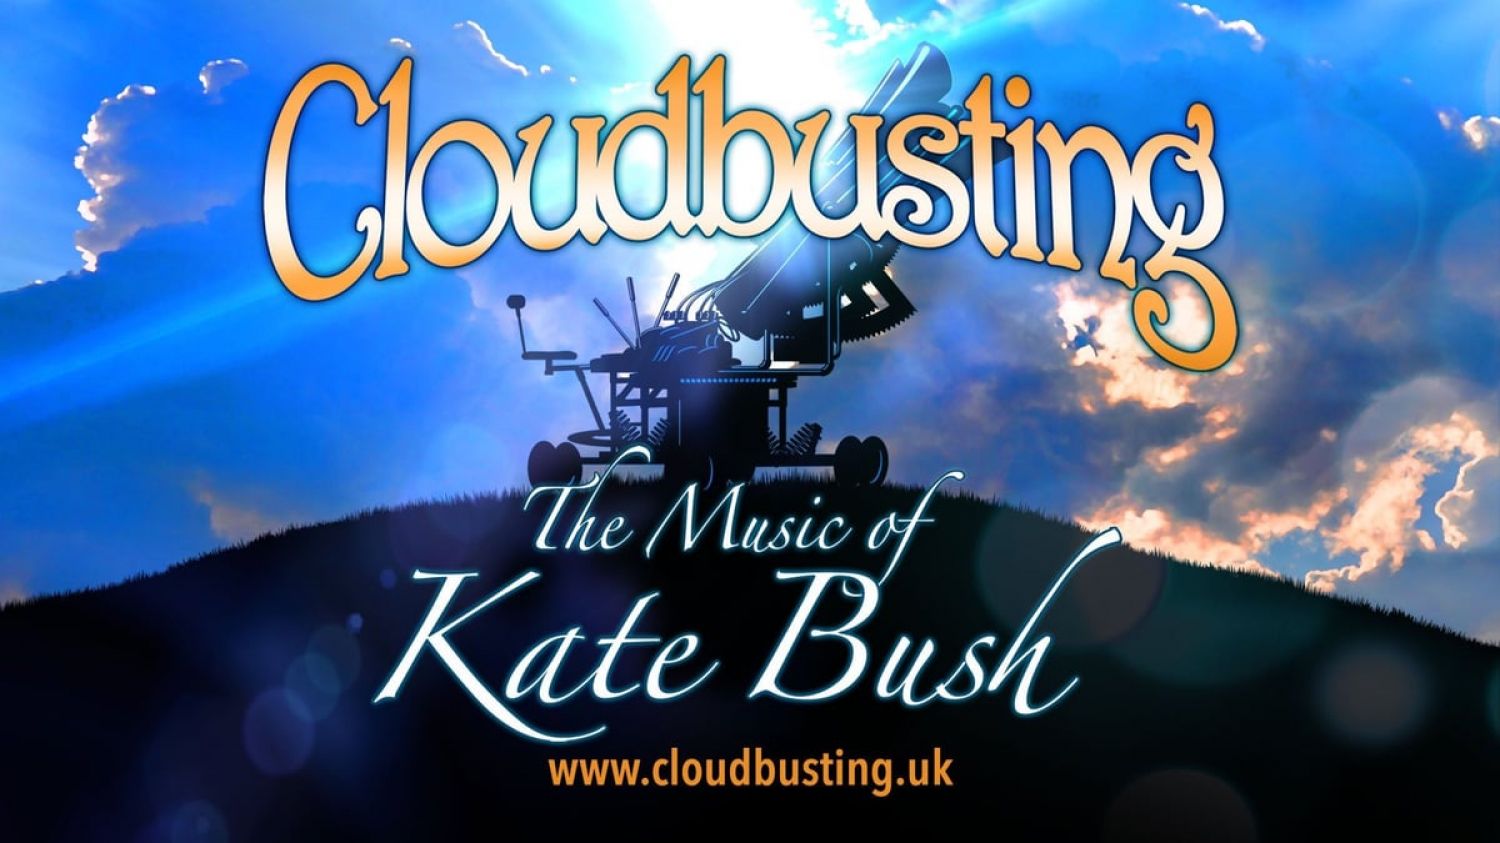 Cloudbusting - The Music of Kate - The Line, The Cross and The Curve